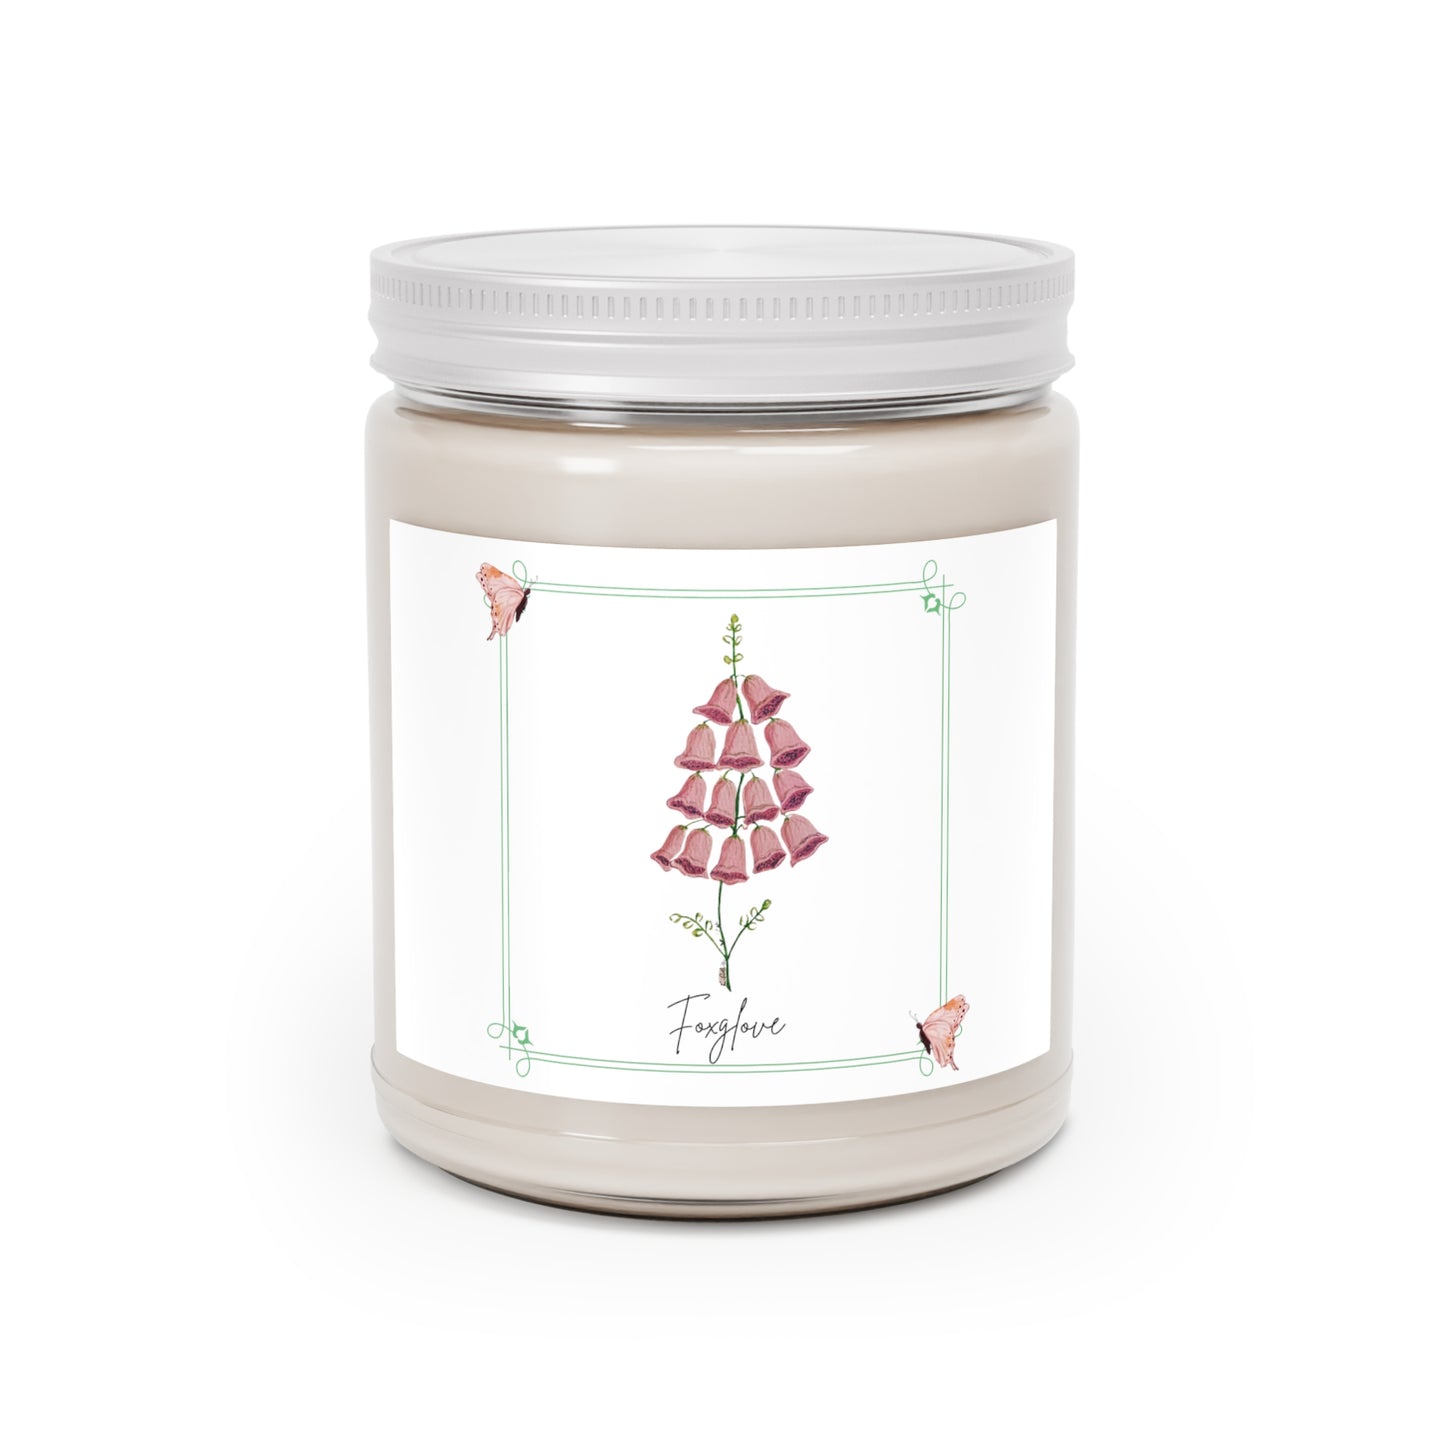 Fabulous Foxglove Floral Handpainted Botanical Scented Candles, 9oz